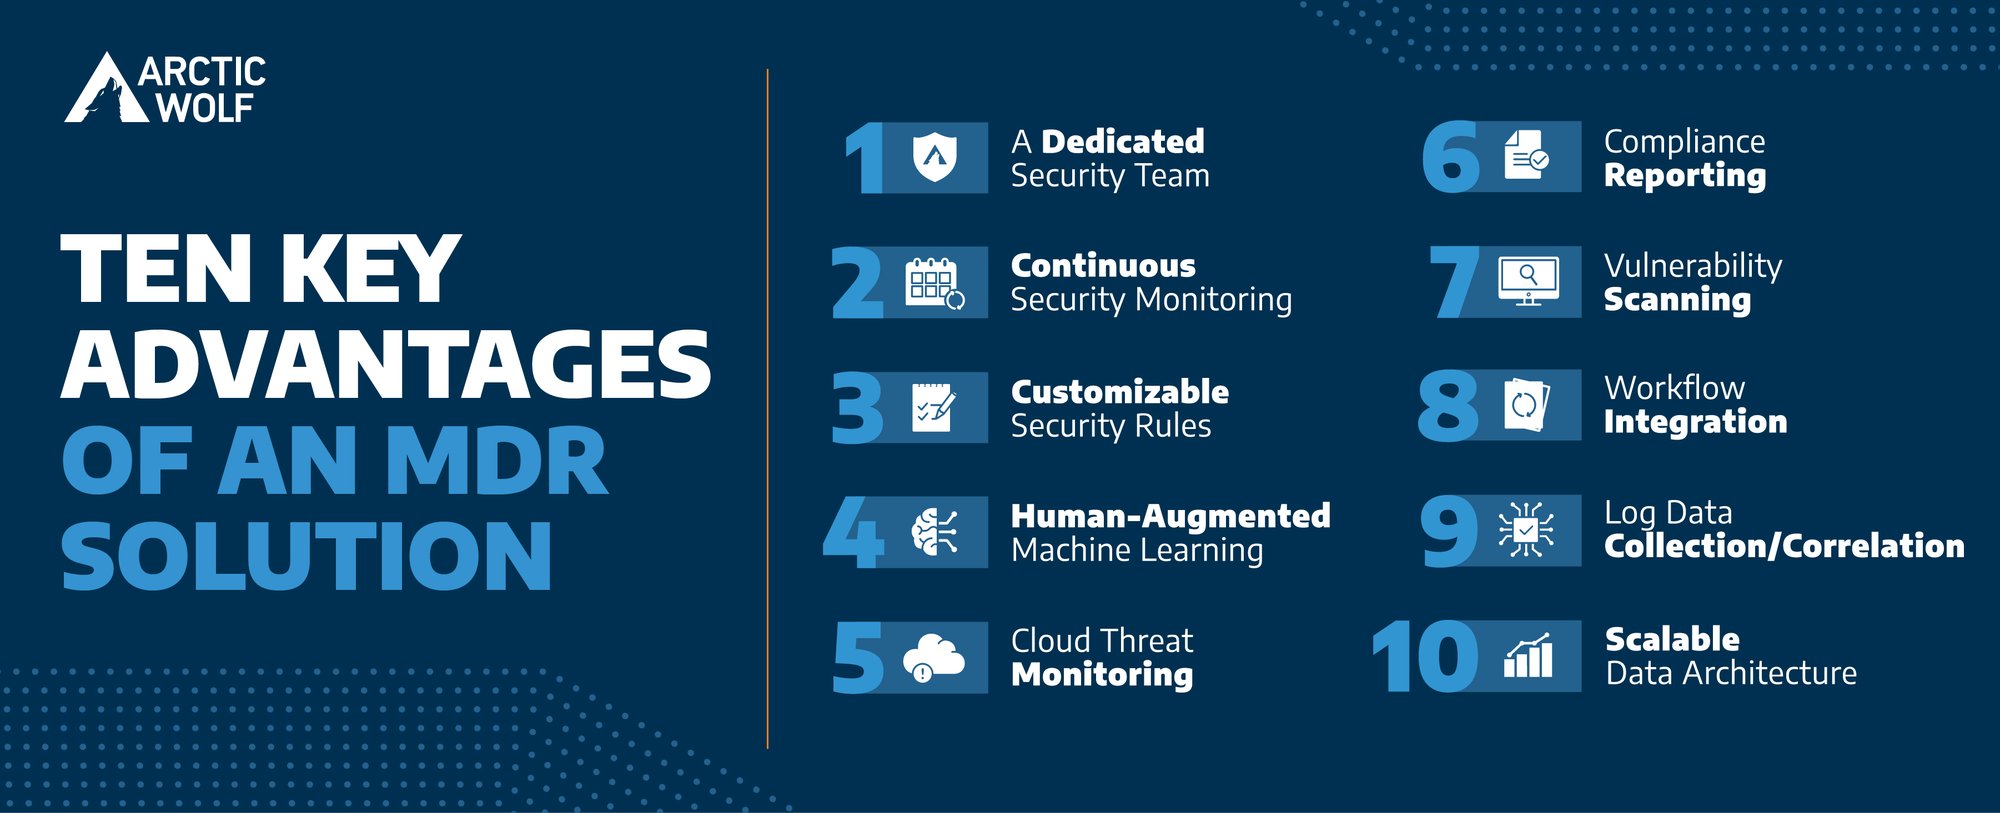 10 Key advantages of an MDR solution: a dedicated security team, continuous security monitoring, customizable security rules, human-augmented machine learning, cloud threat monitoring, compliance reporting, vulnerability scanning, workflow integration, log data collection, scalable data architecture